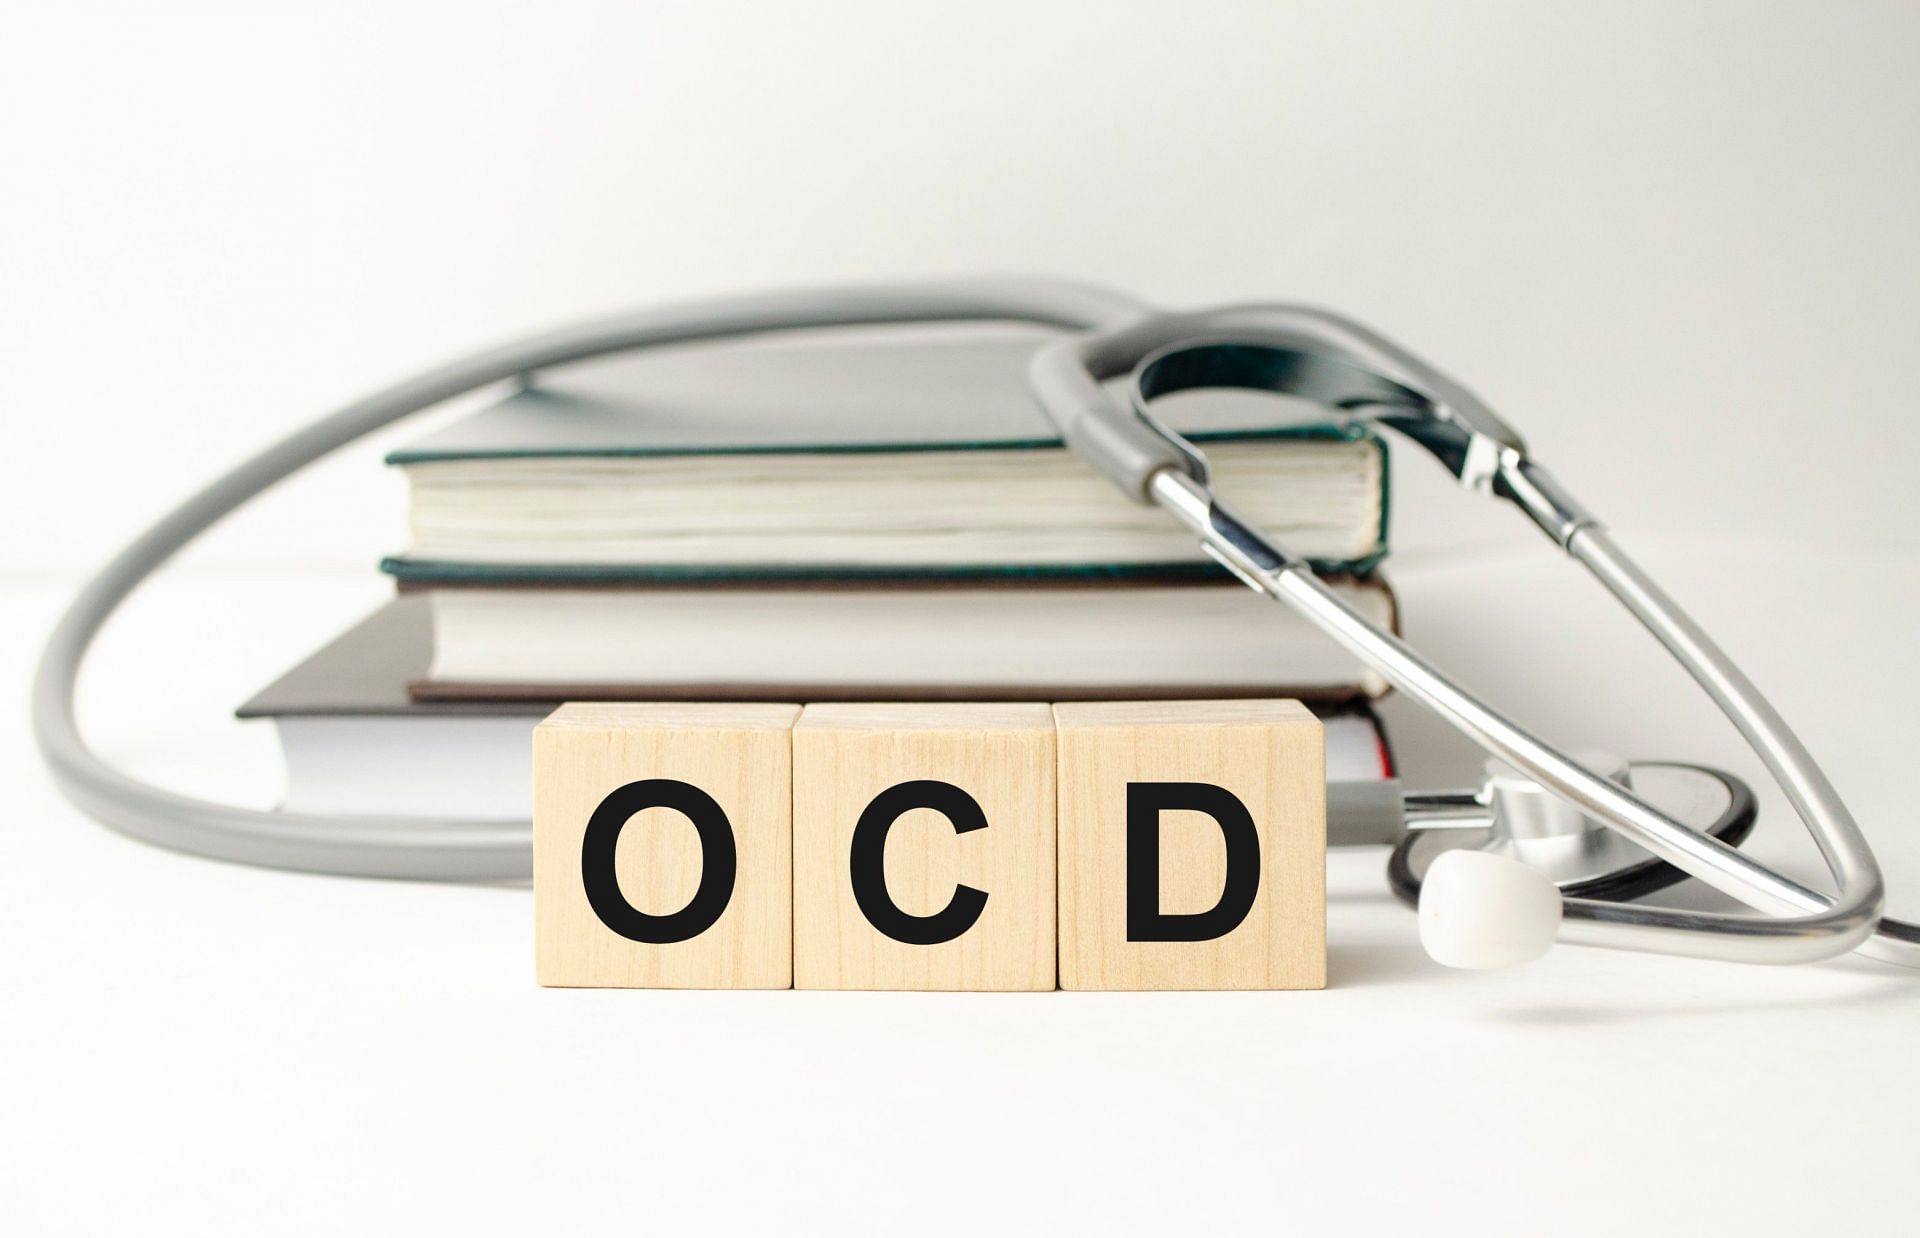 Exposure and response prevention is one of the key treatments for OCD. (Image via Vecteezy/ Ruslan)